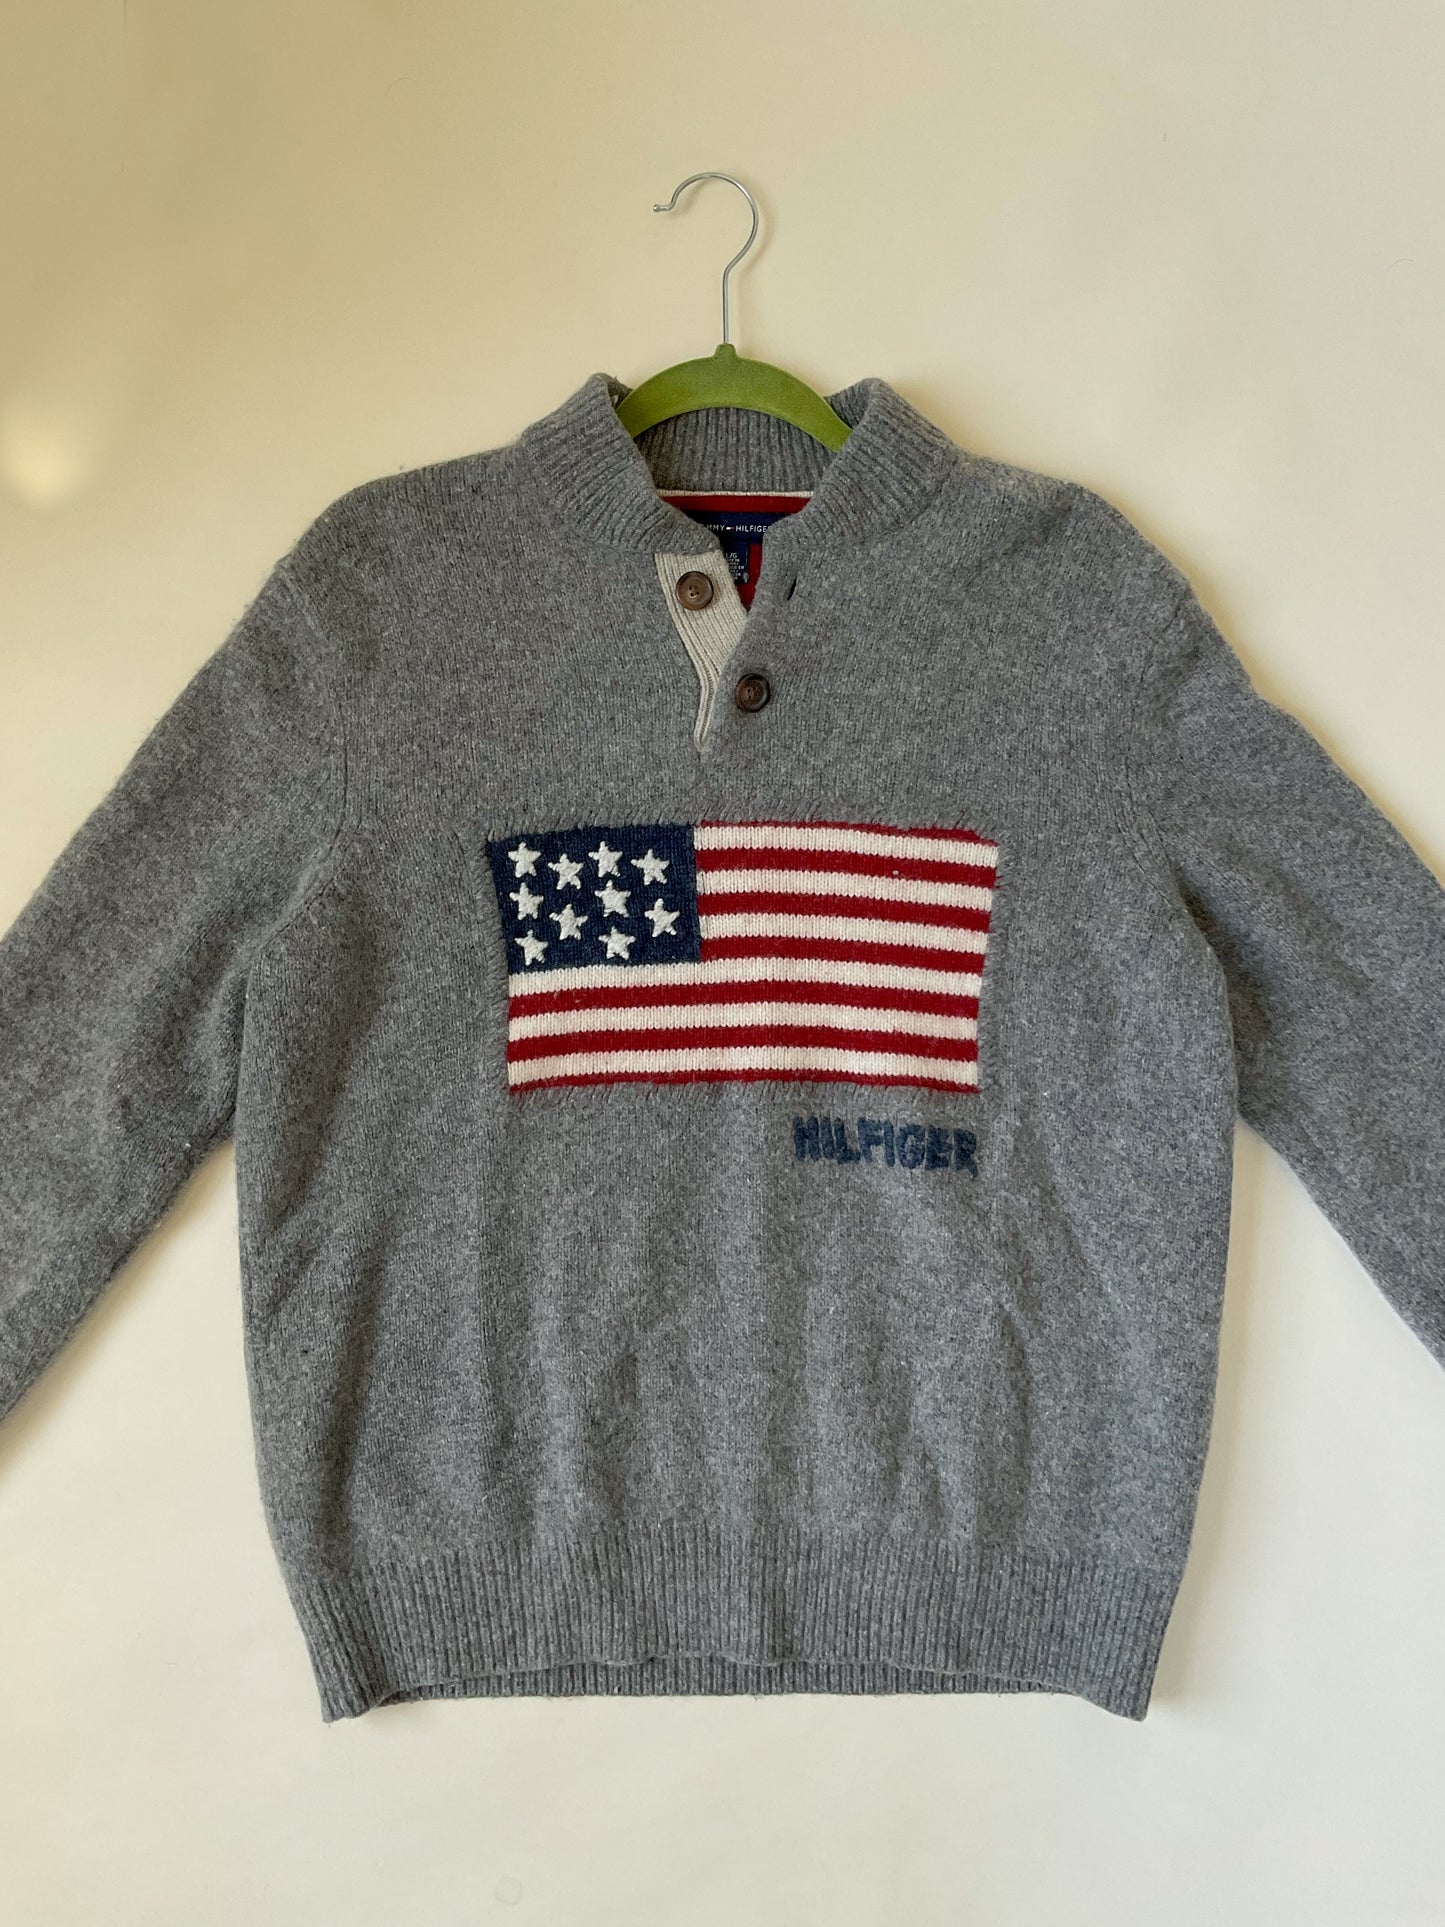 Tommy Hilfiger American Flag Sweater